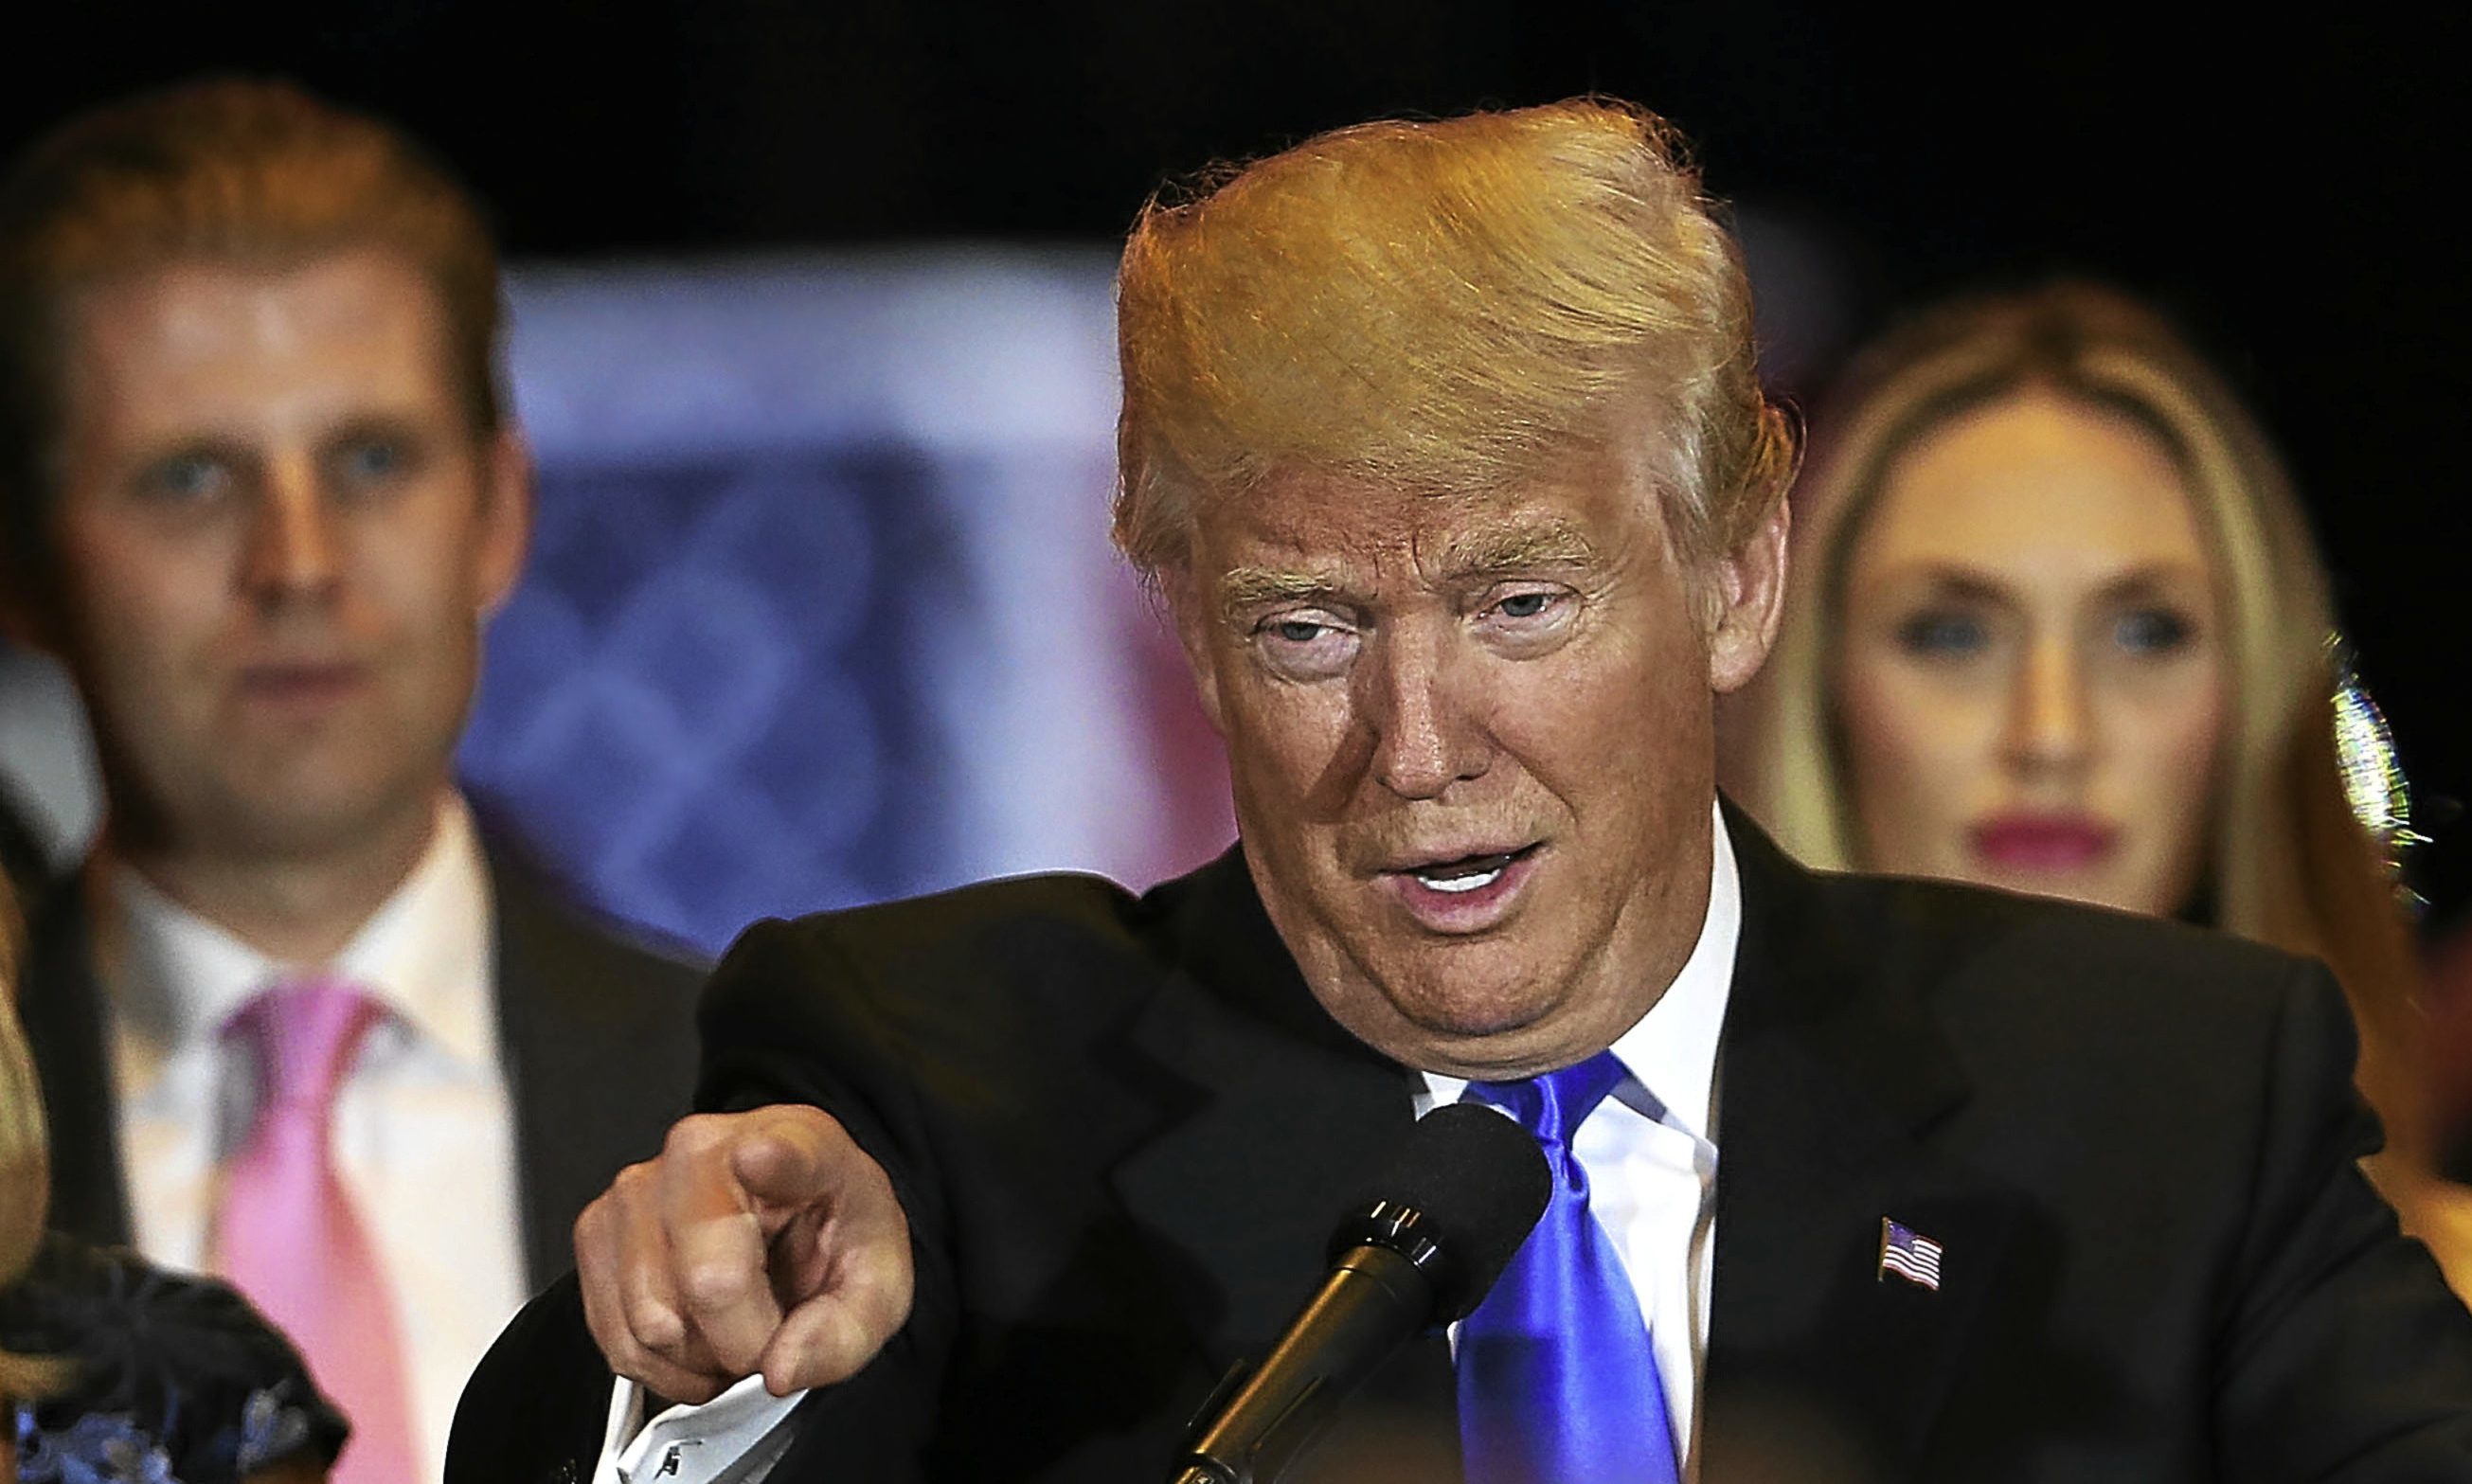 Donald Trump looks set to contend the US presidential election for the Republicans.